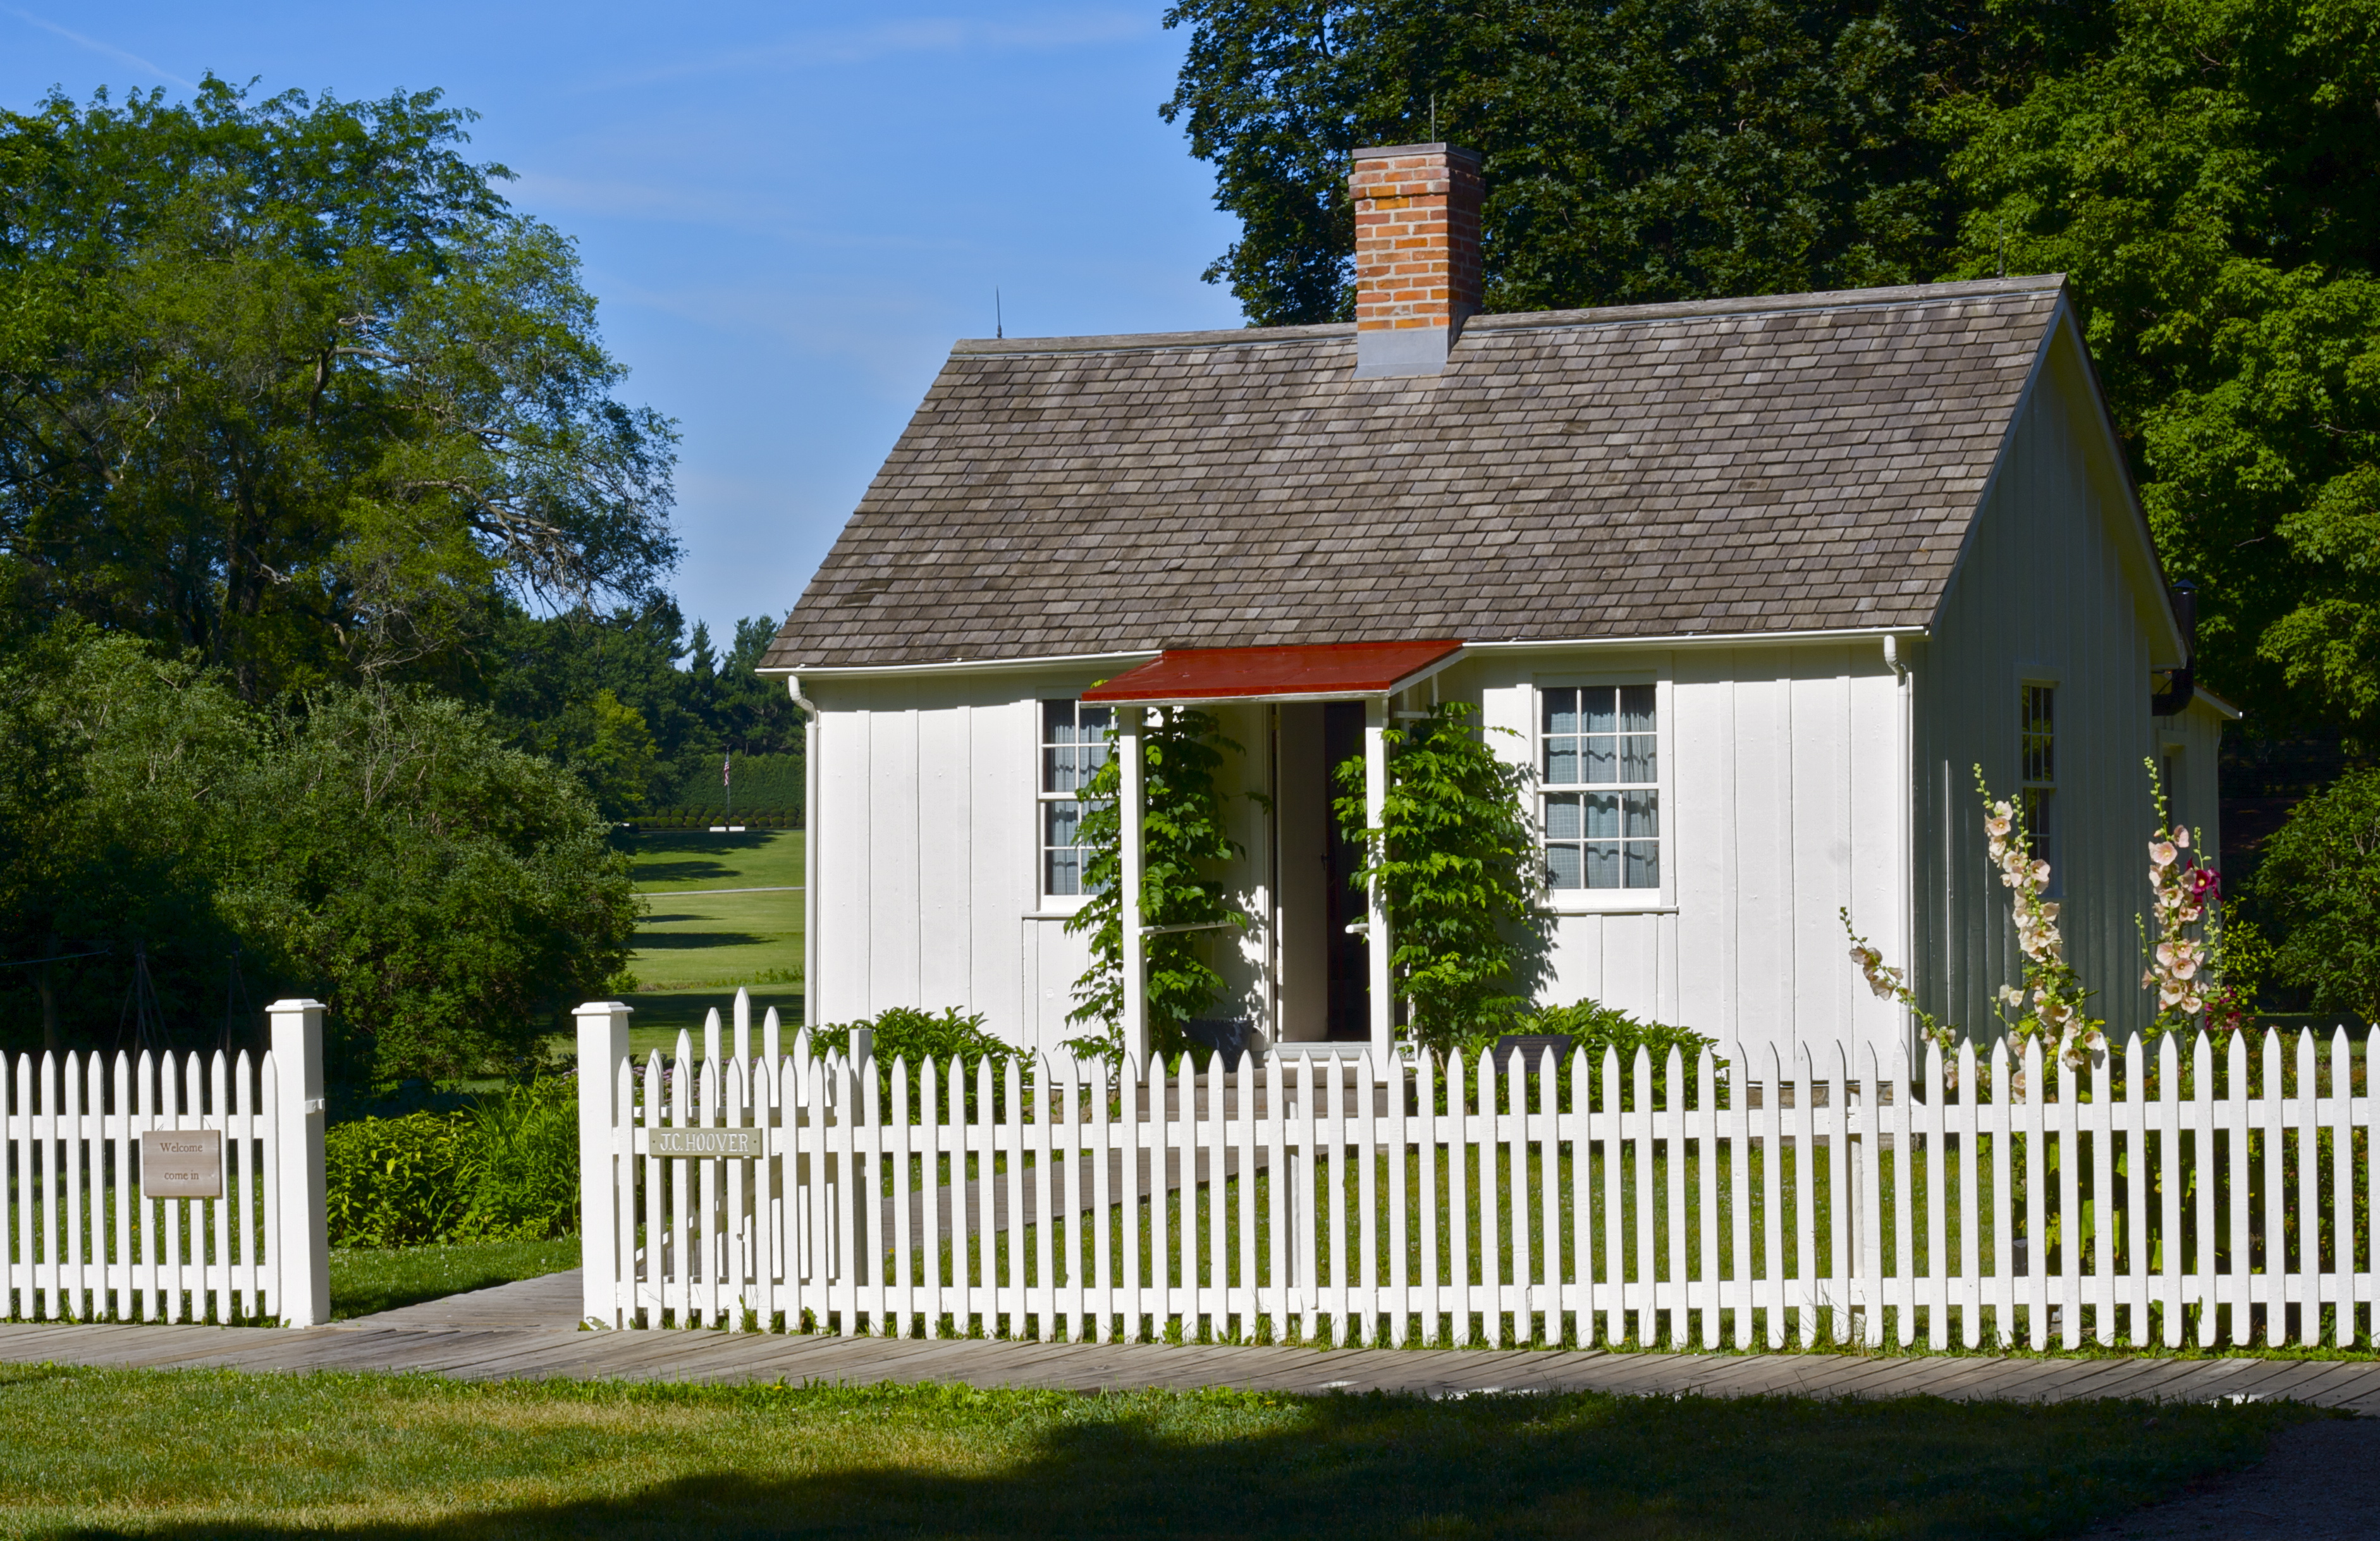 A one story wood frame house has board-and-batten exterior siding and a picket fence painted white.